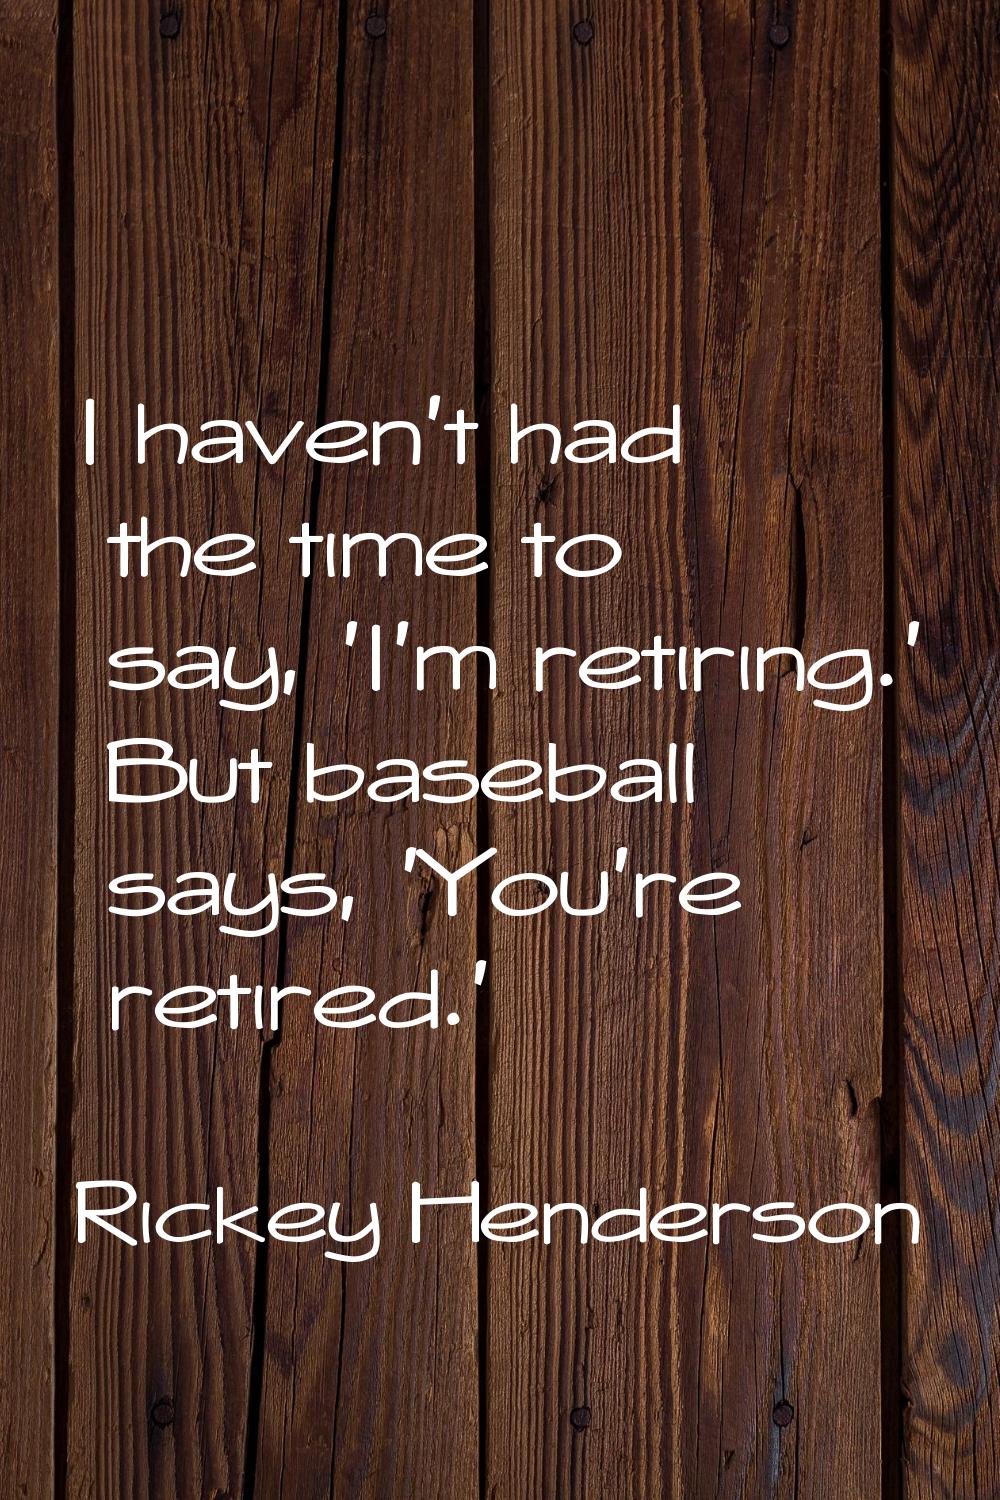 I haven't had the time to say, 'I'm retiring.' But baseball says, 'You're retired.'